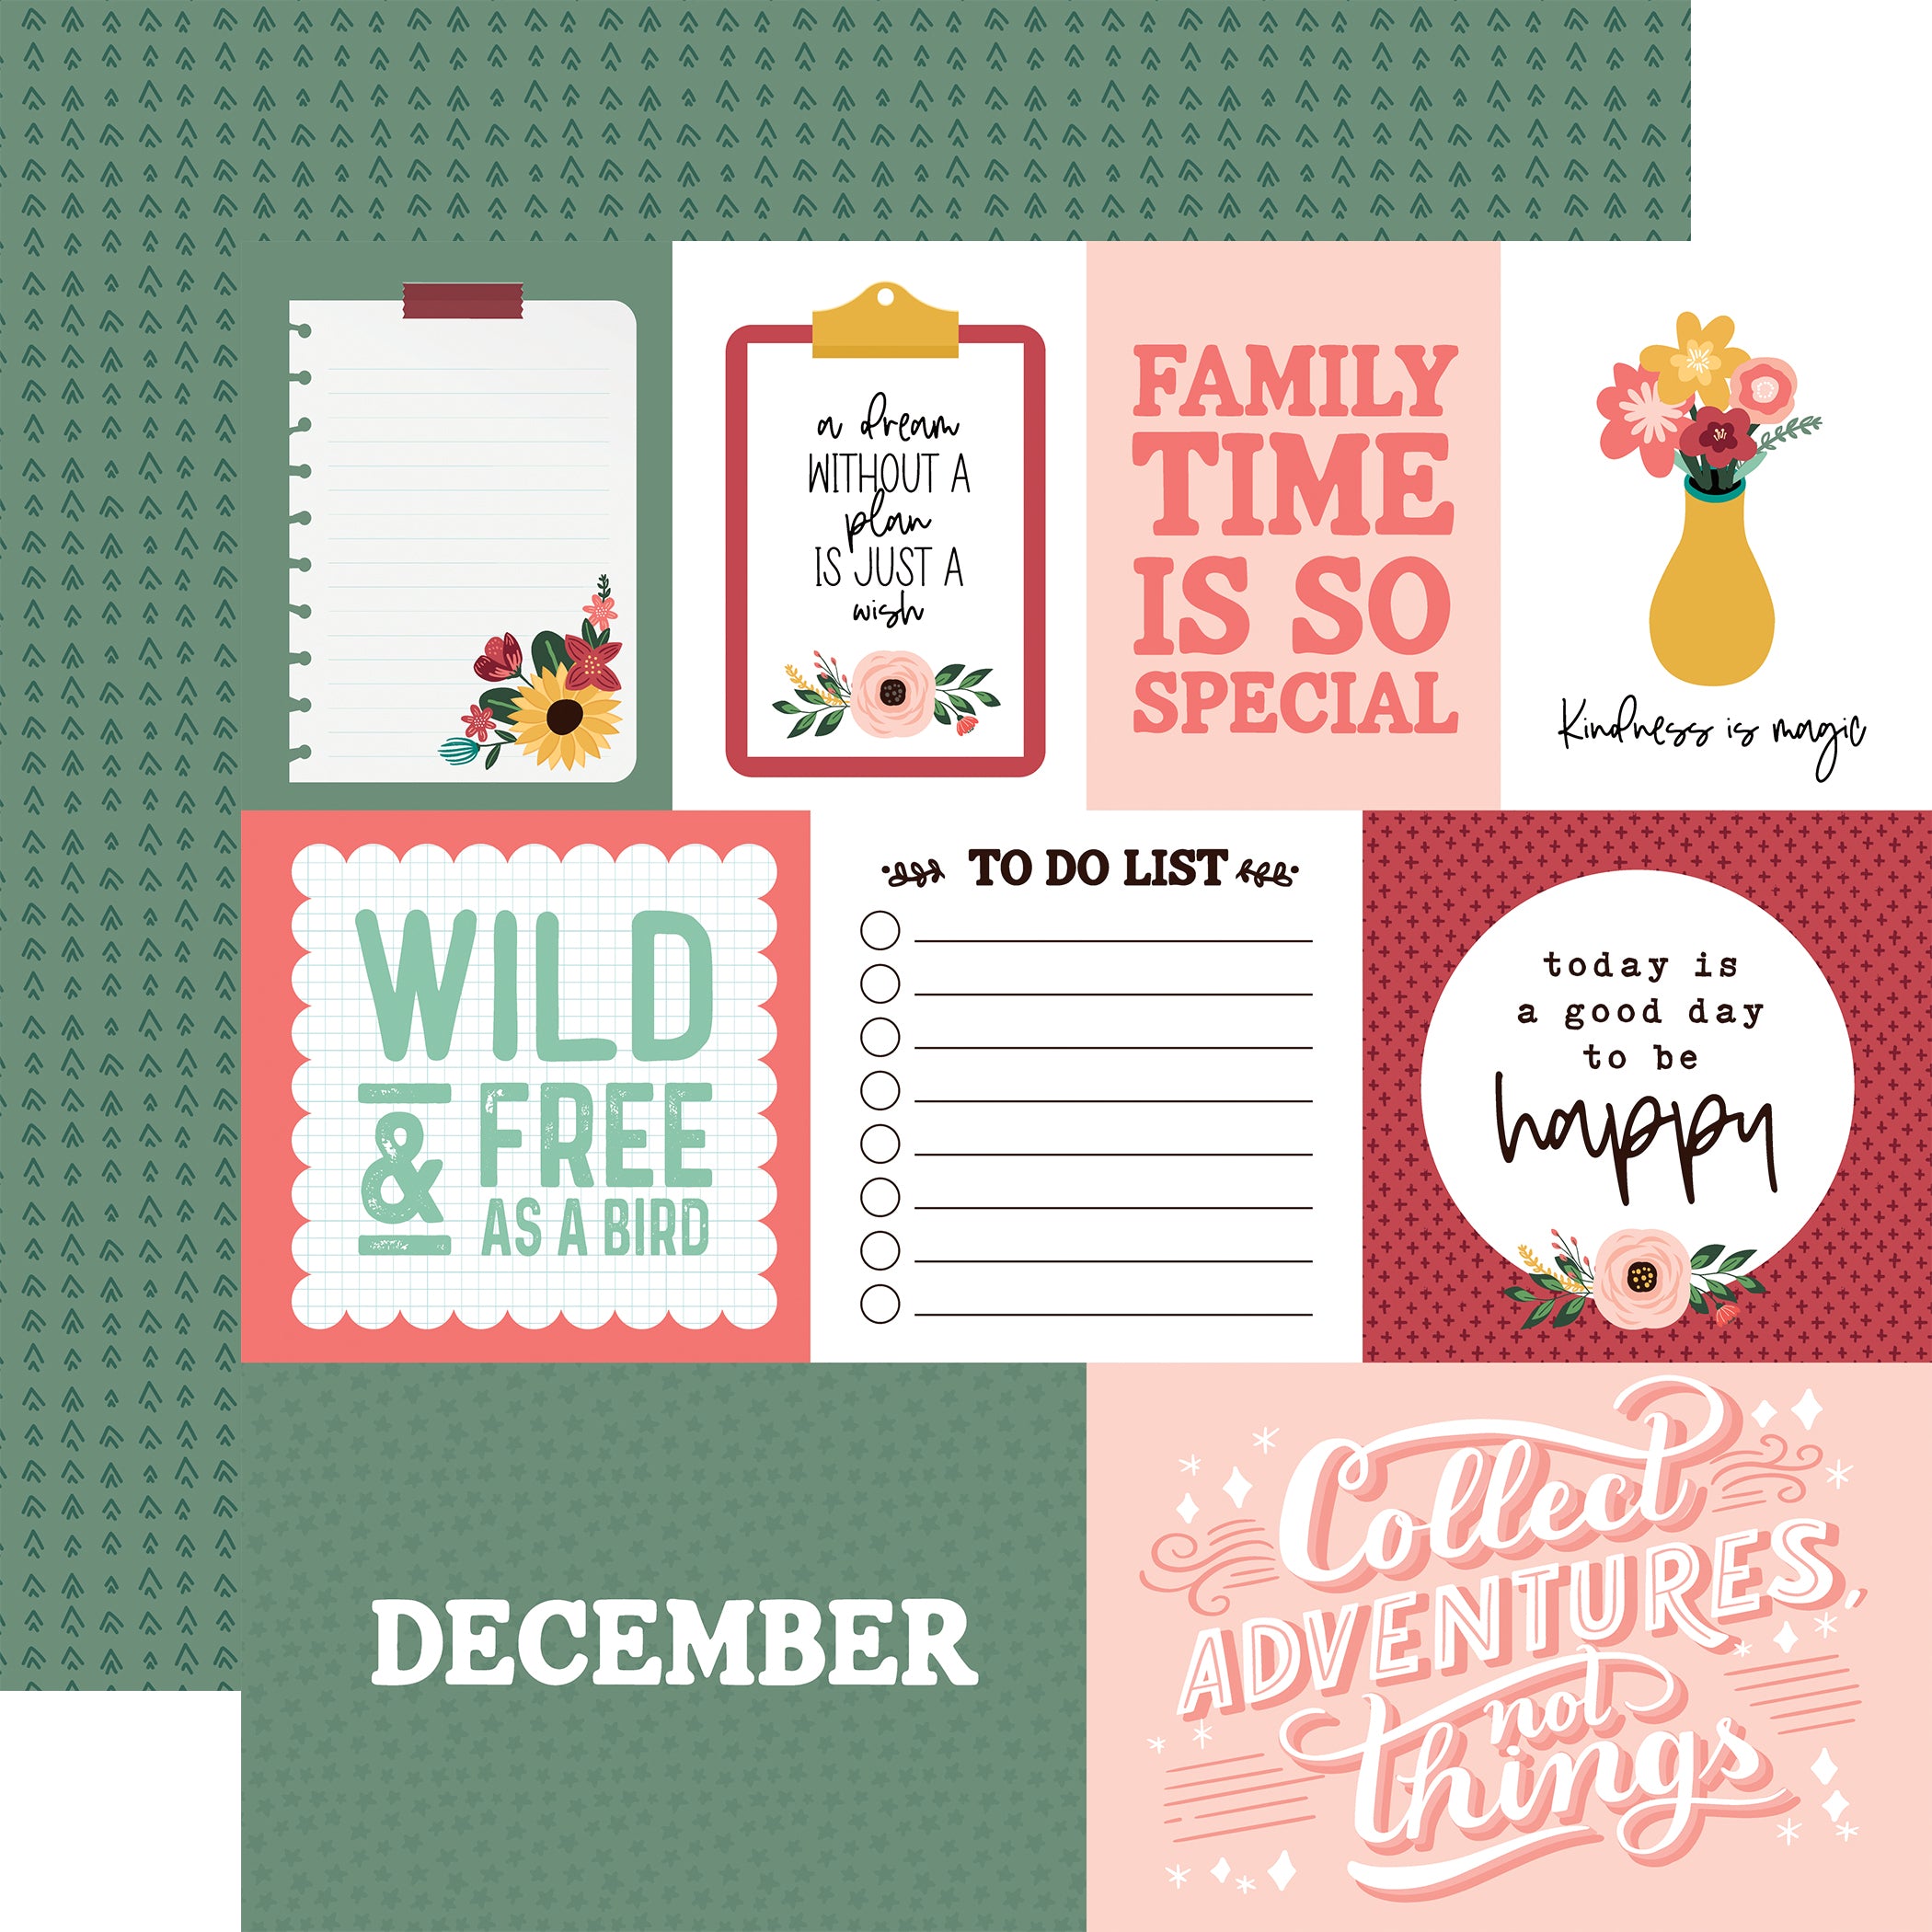 Year In Review Collection December 12 x 12 Double-Sided Scrapbook Paper by Echo Park Paper